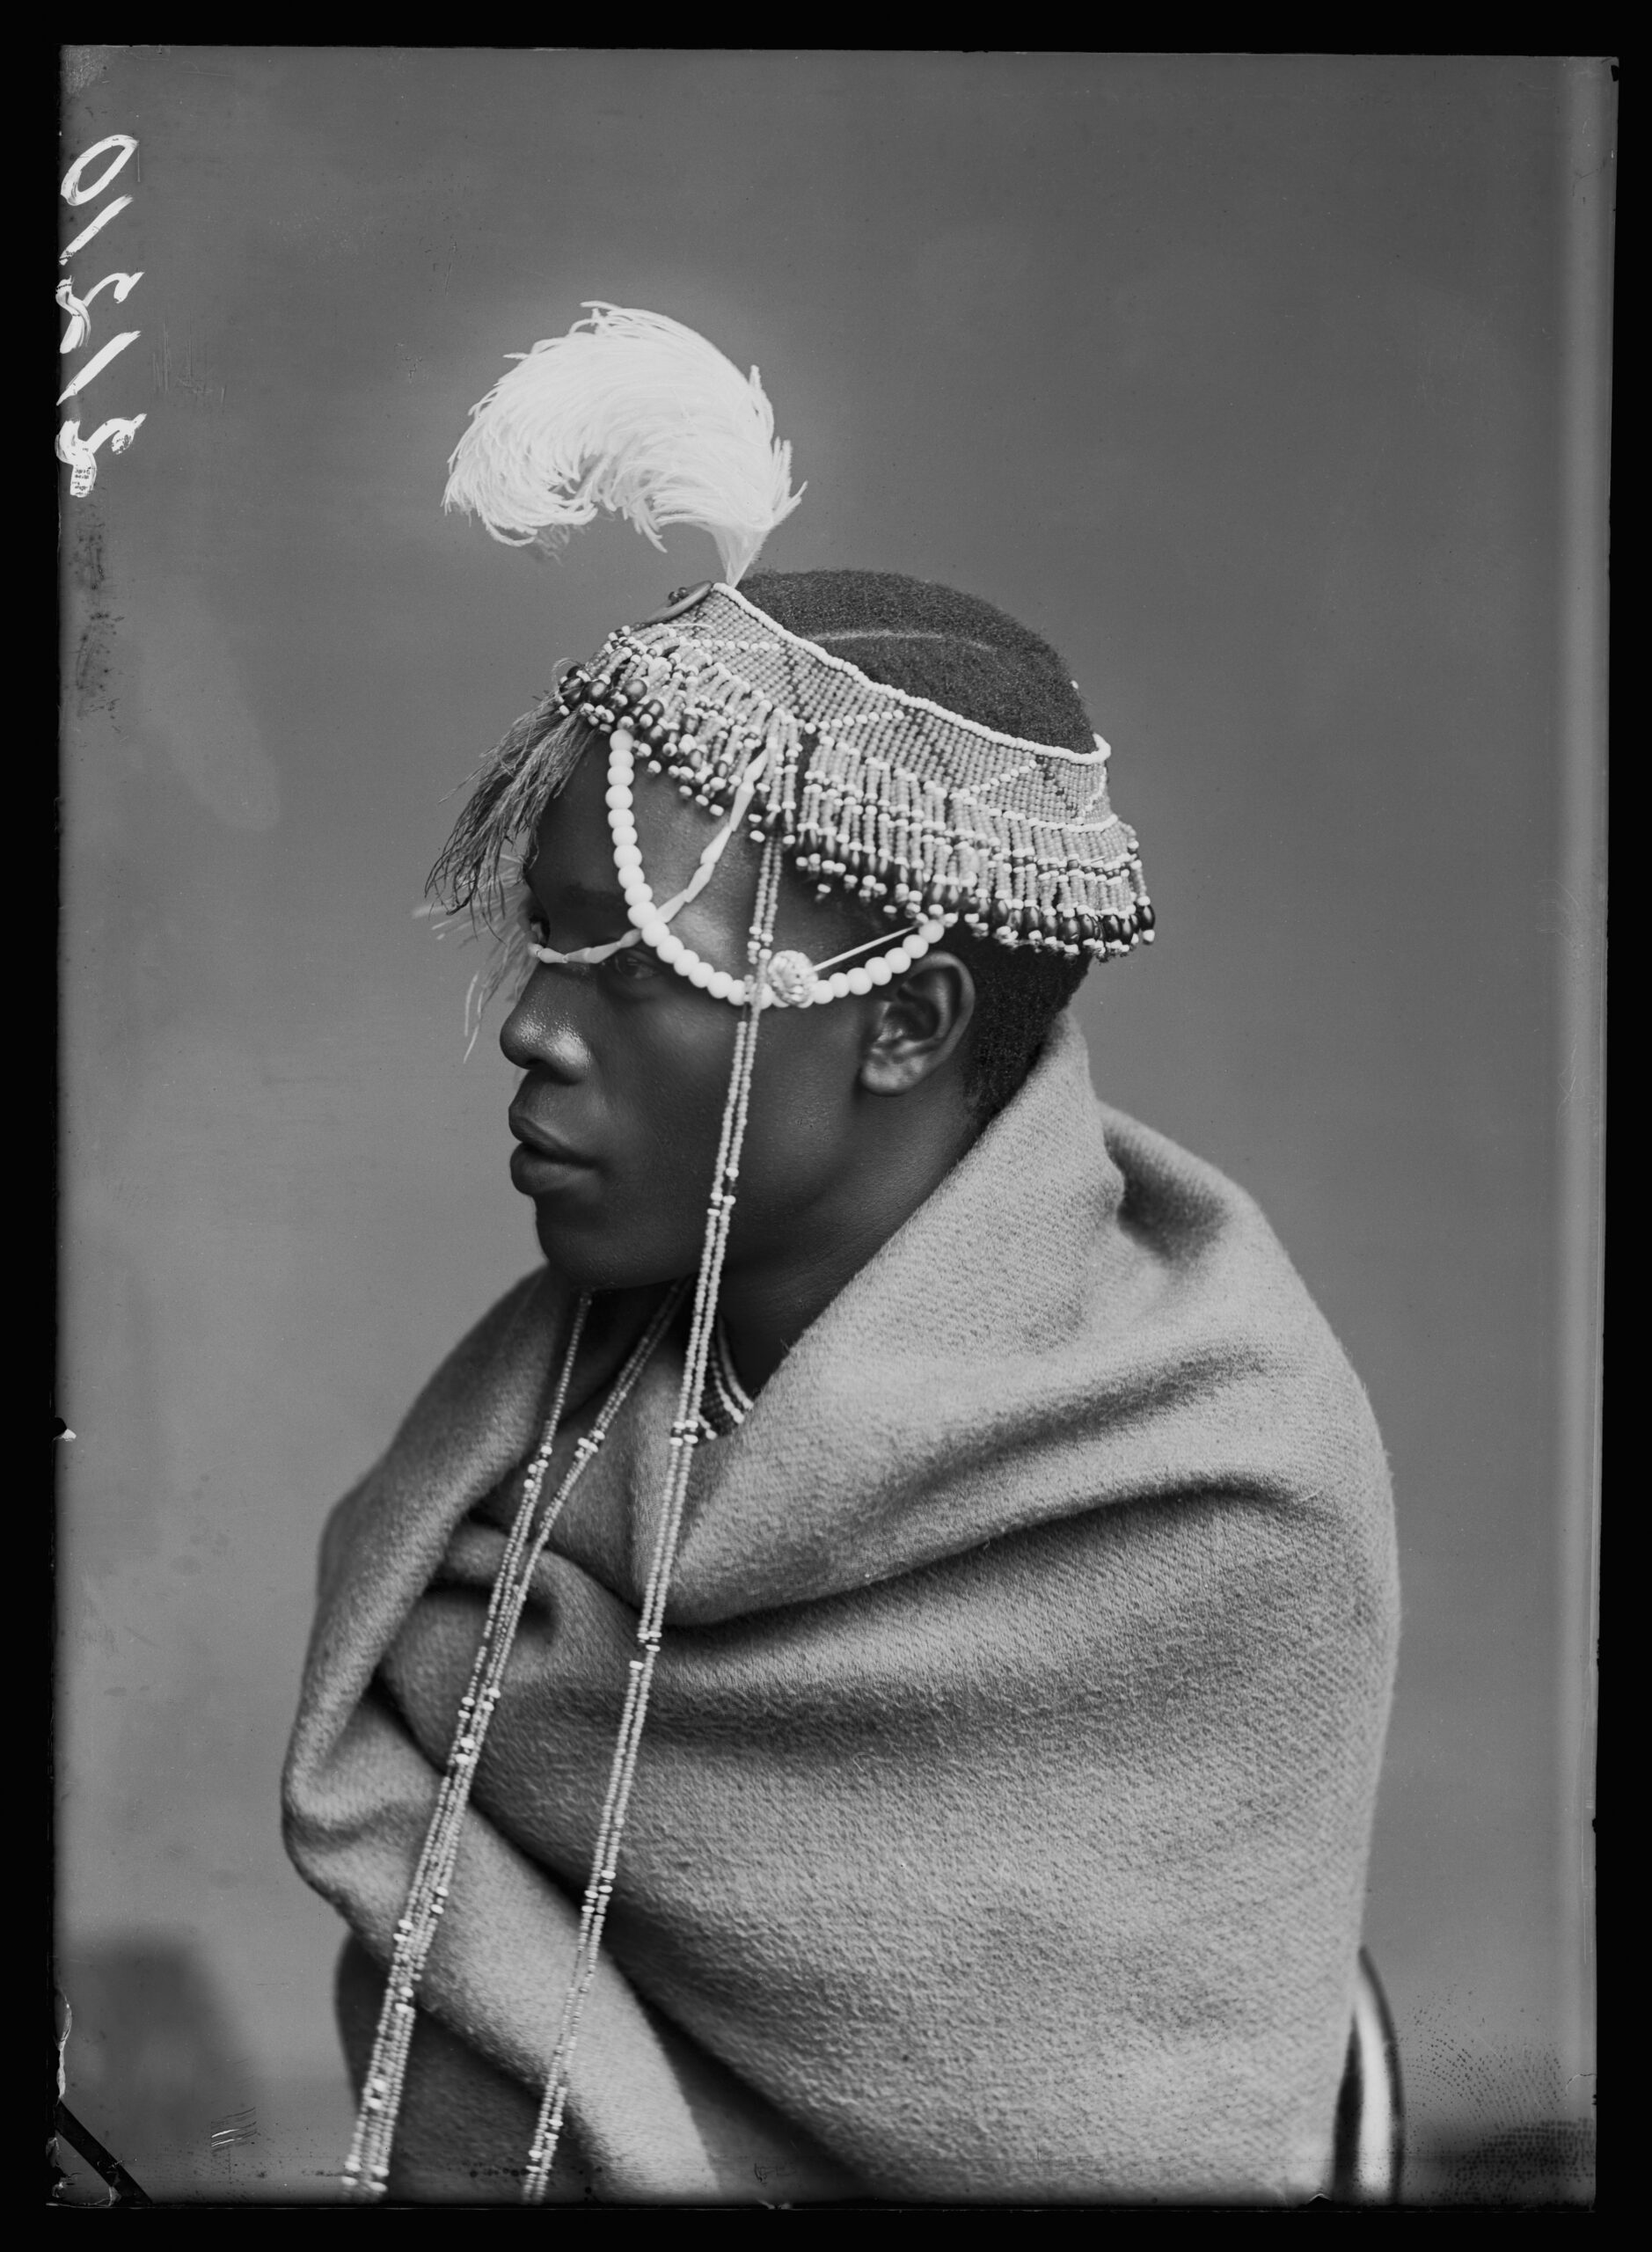 A studio portrait in black and white of a man wearing traditional dress, looking off to the right